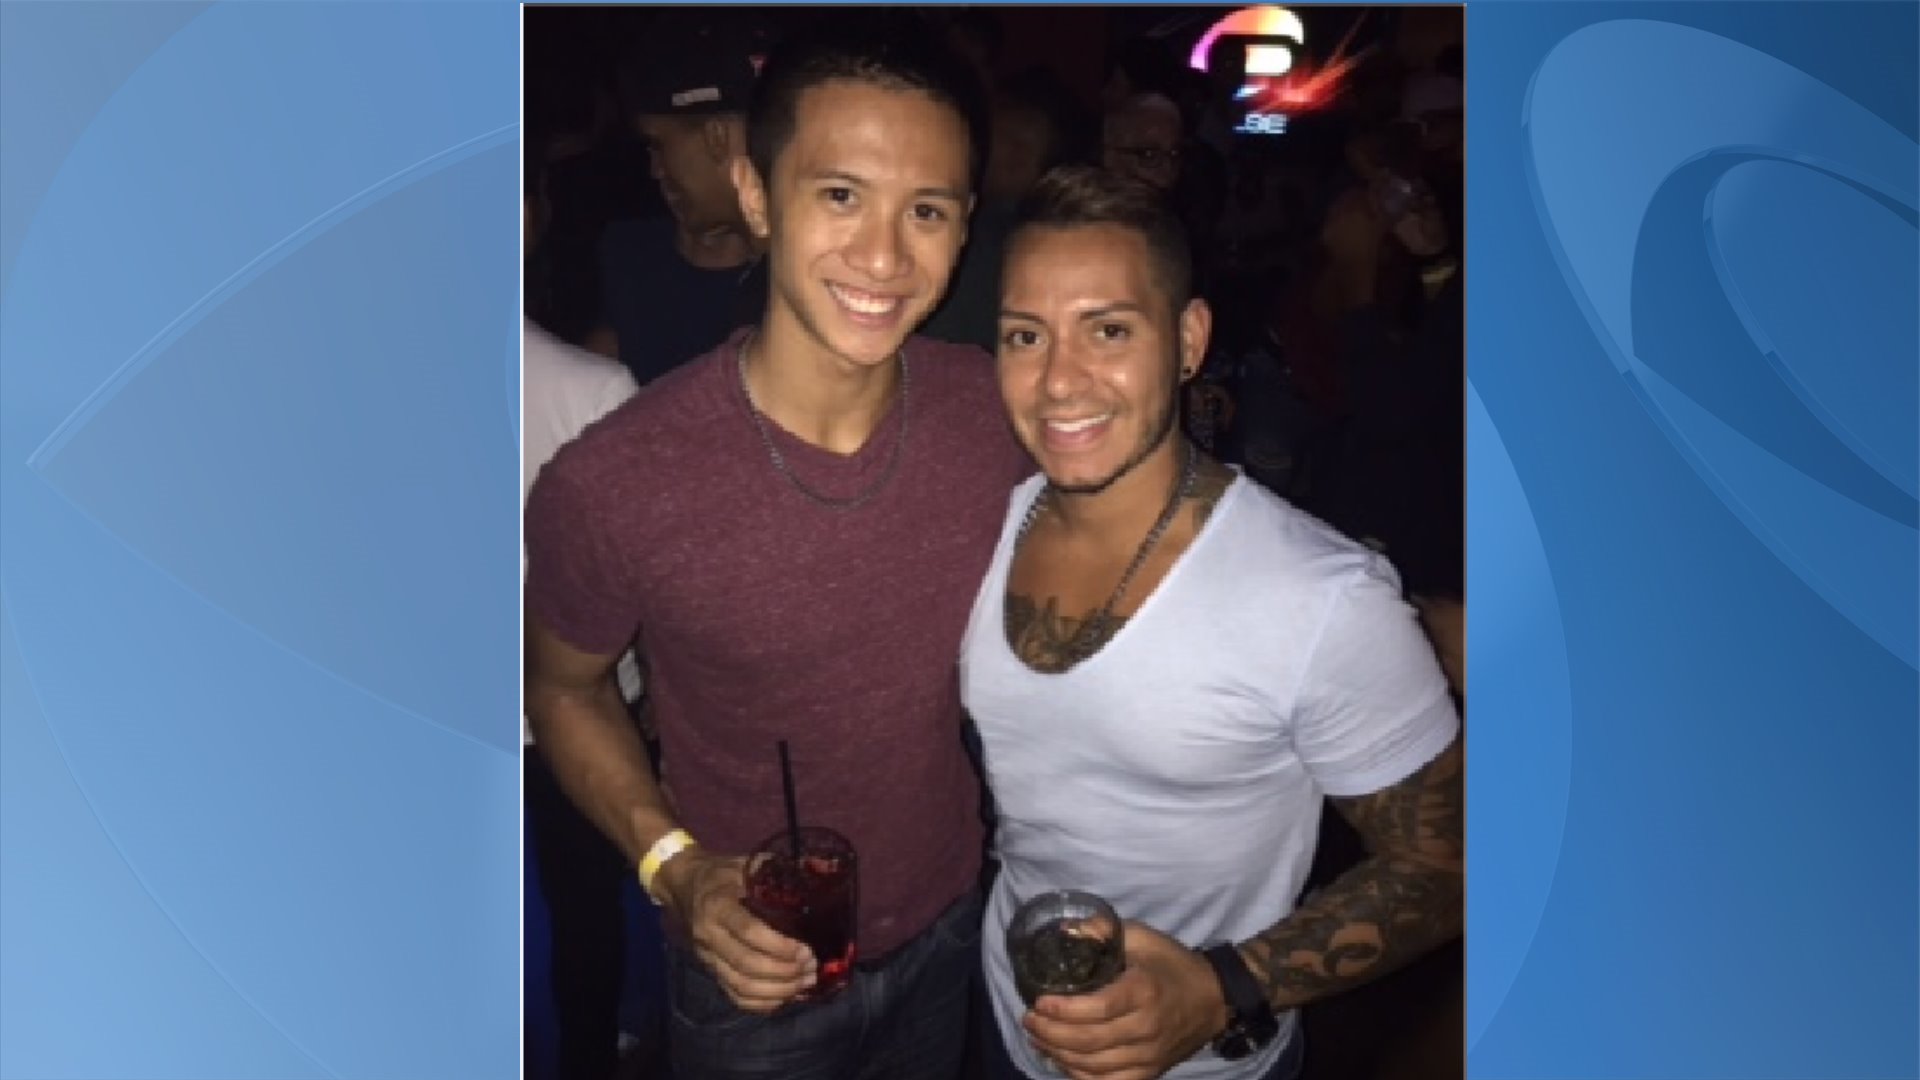 - Pulse, a gay nightclub in Orlando, was a second home - a sanctuary for LG...